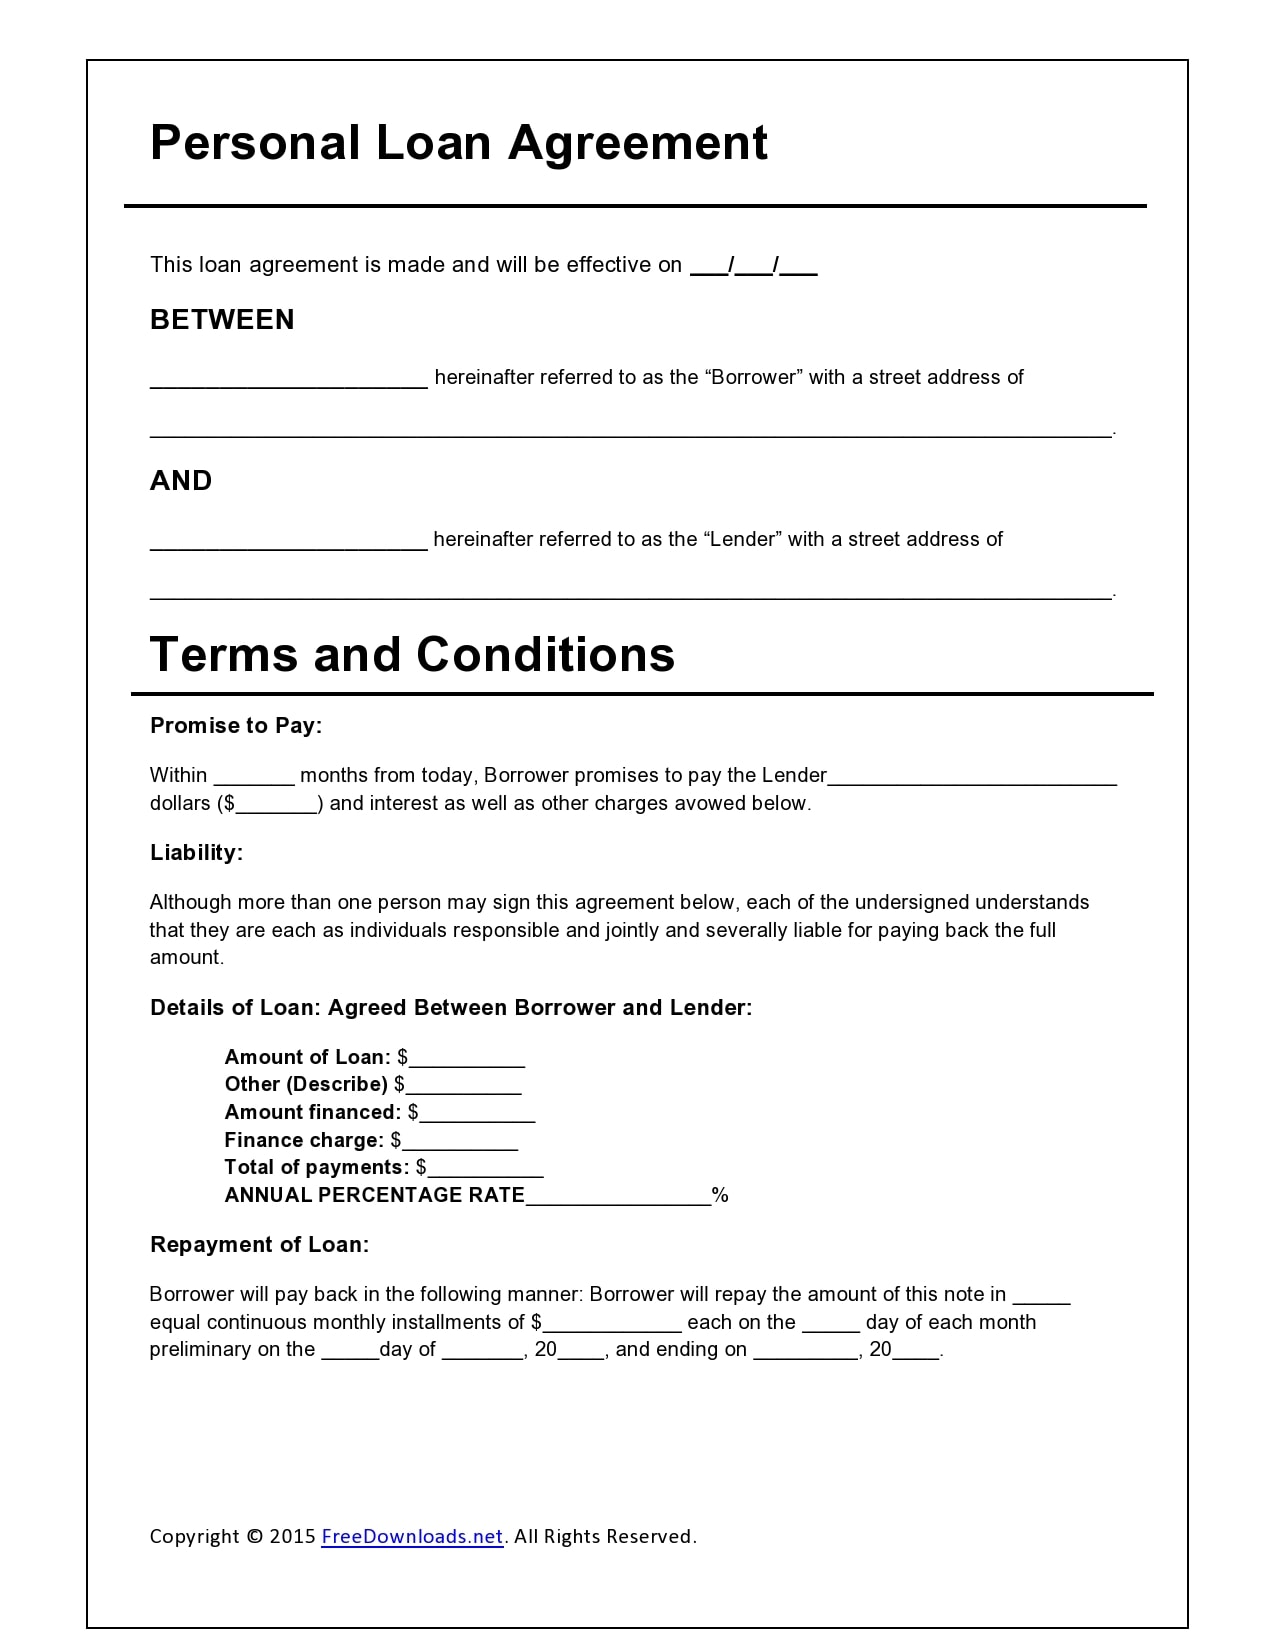 22 Simple Family Loan Agreement Templates (22% Free) With Regard To personal loan repayment agreement template